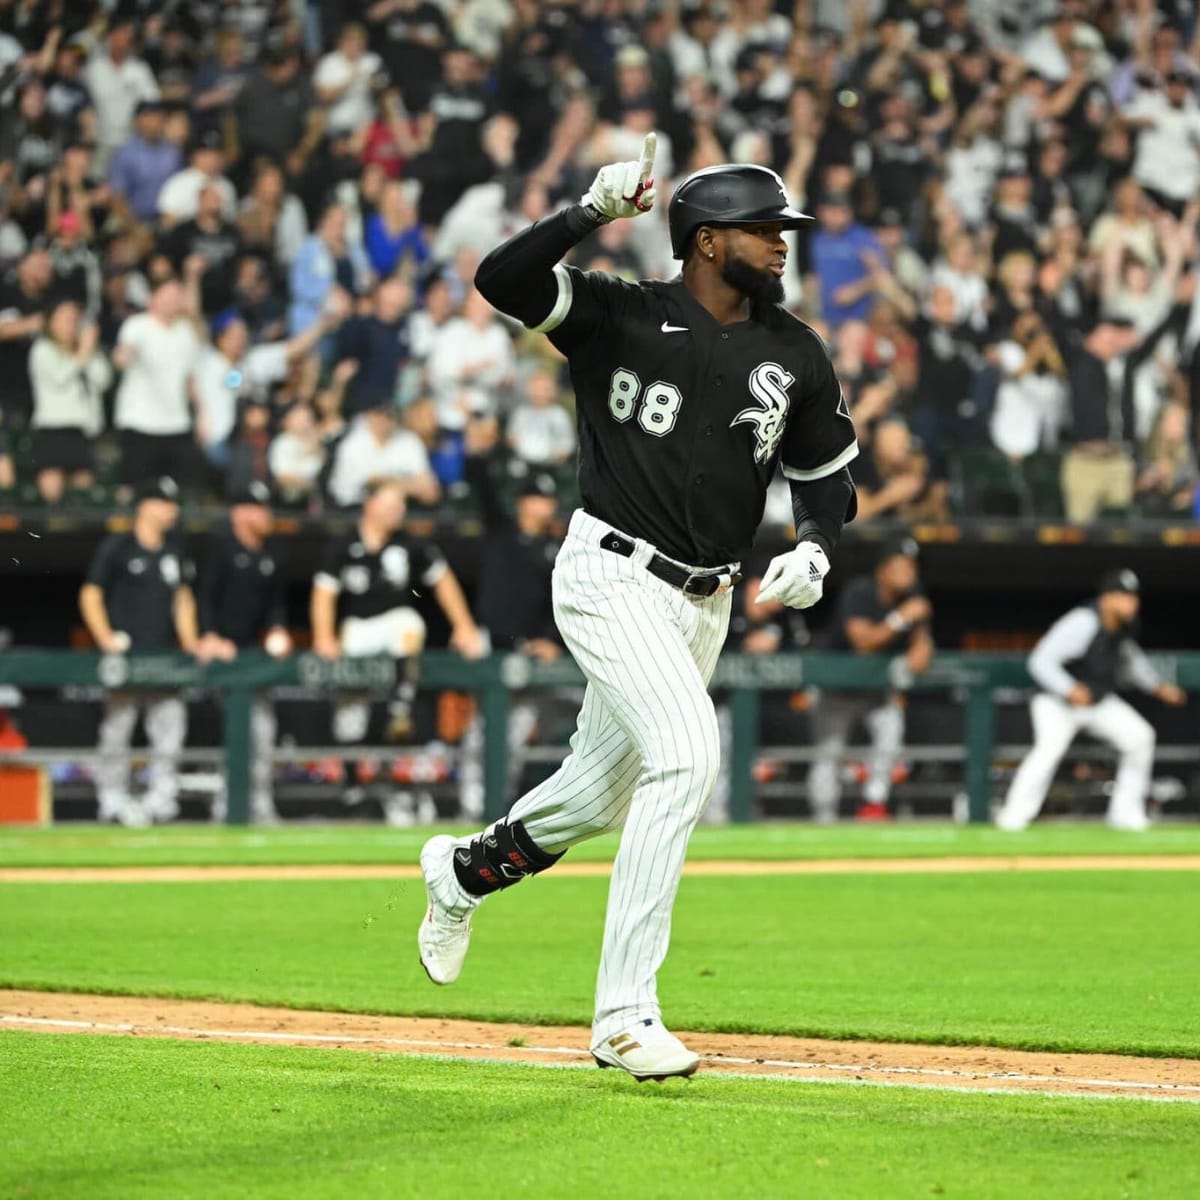 White Sox take another step up with 3-2 win over Yankees